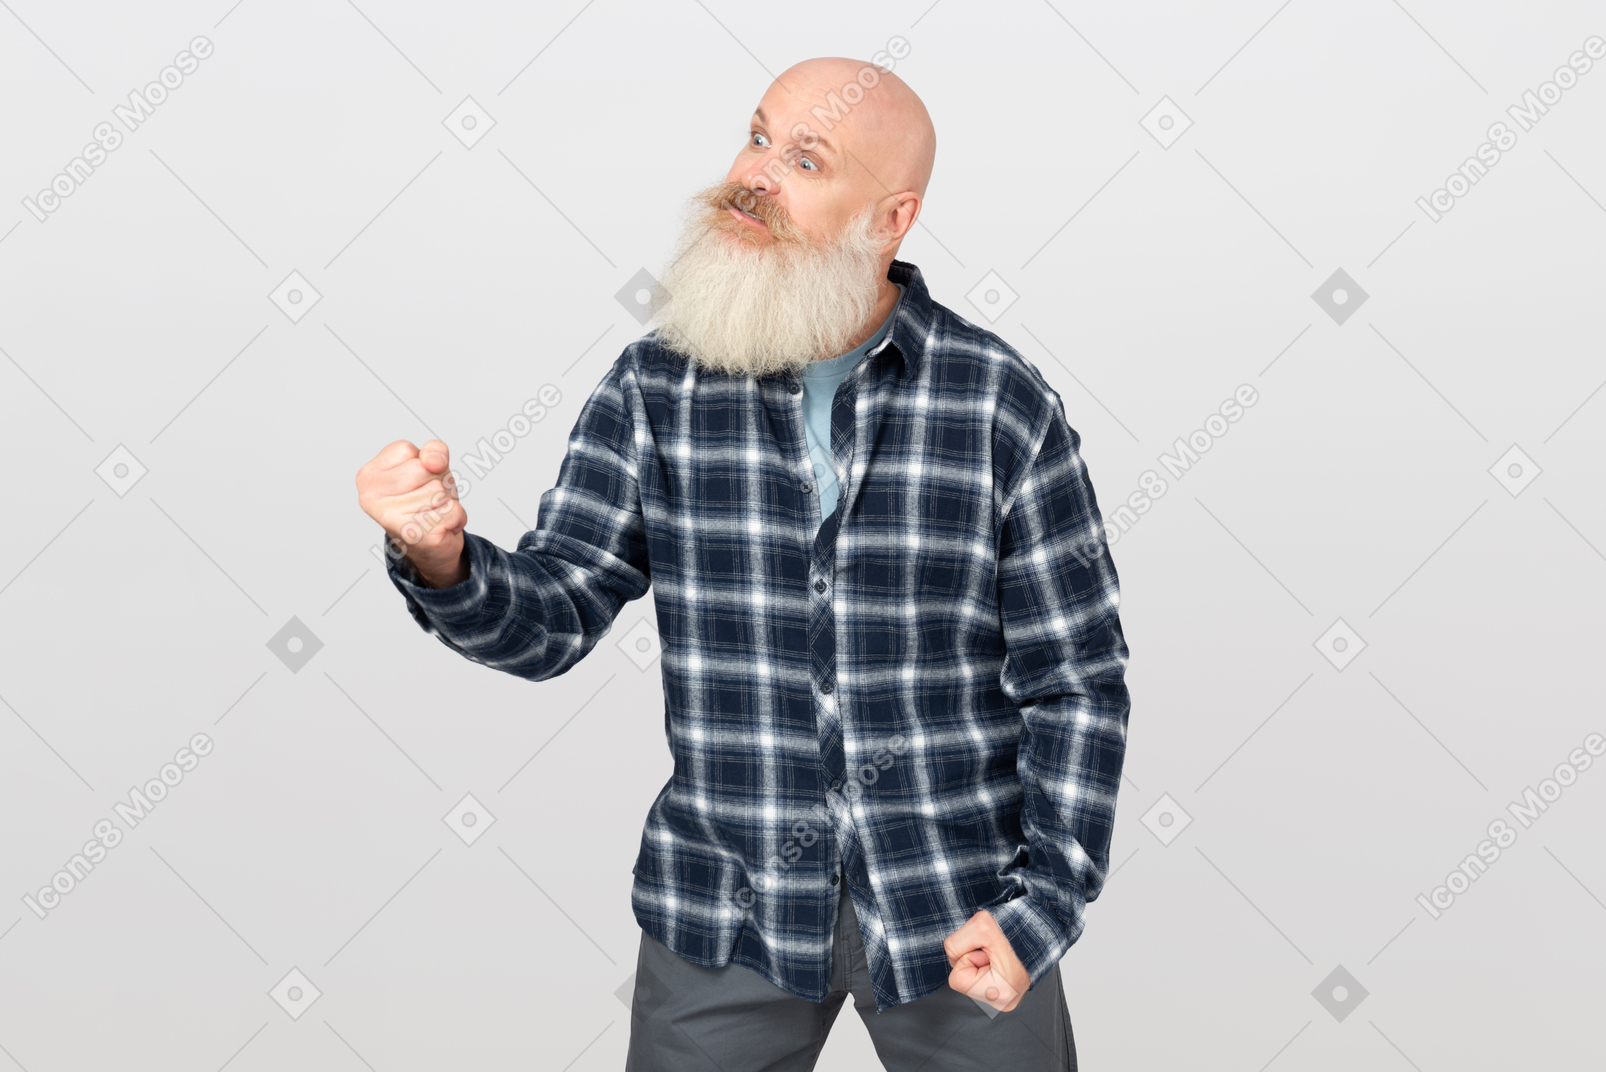 Angry mature bearded man showing his fist